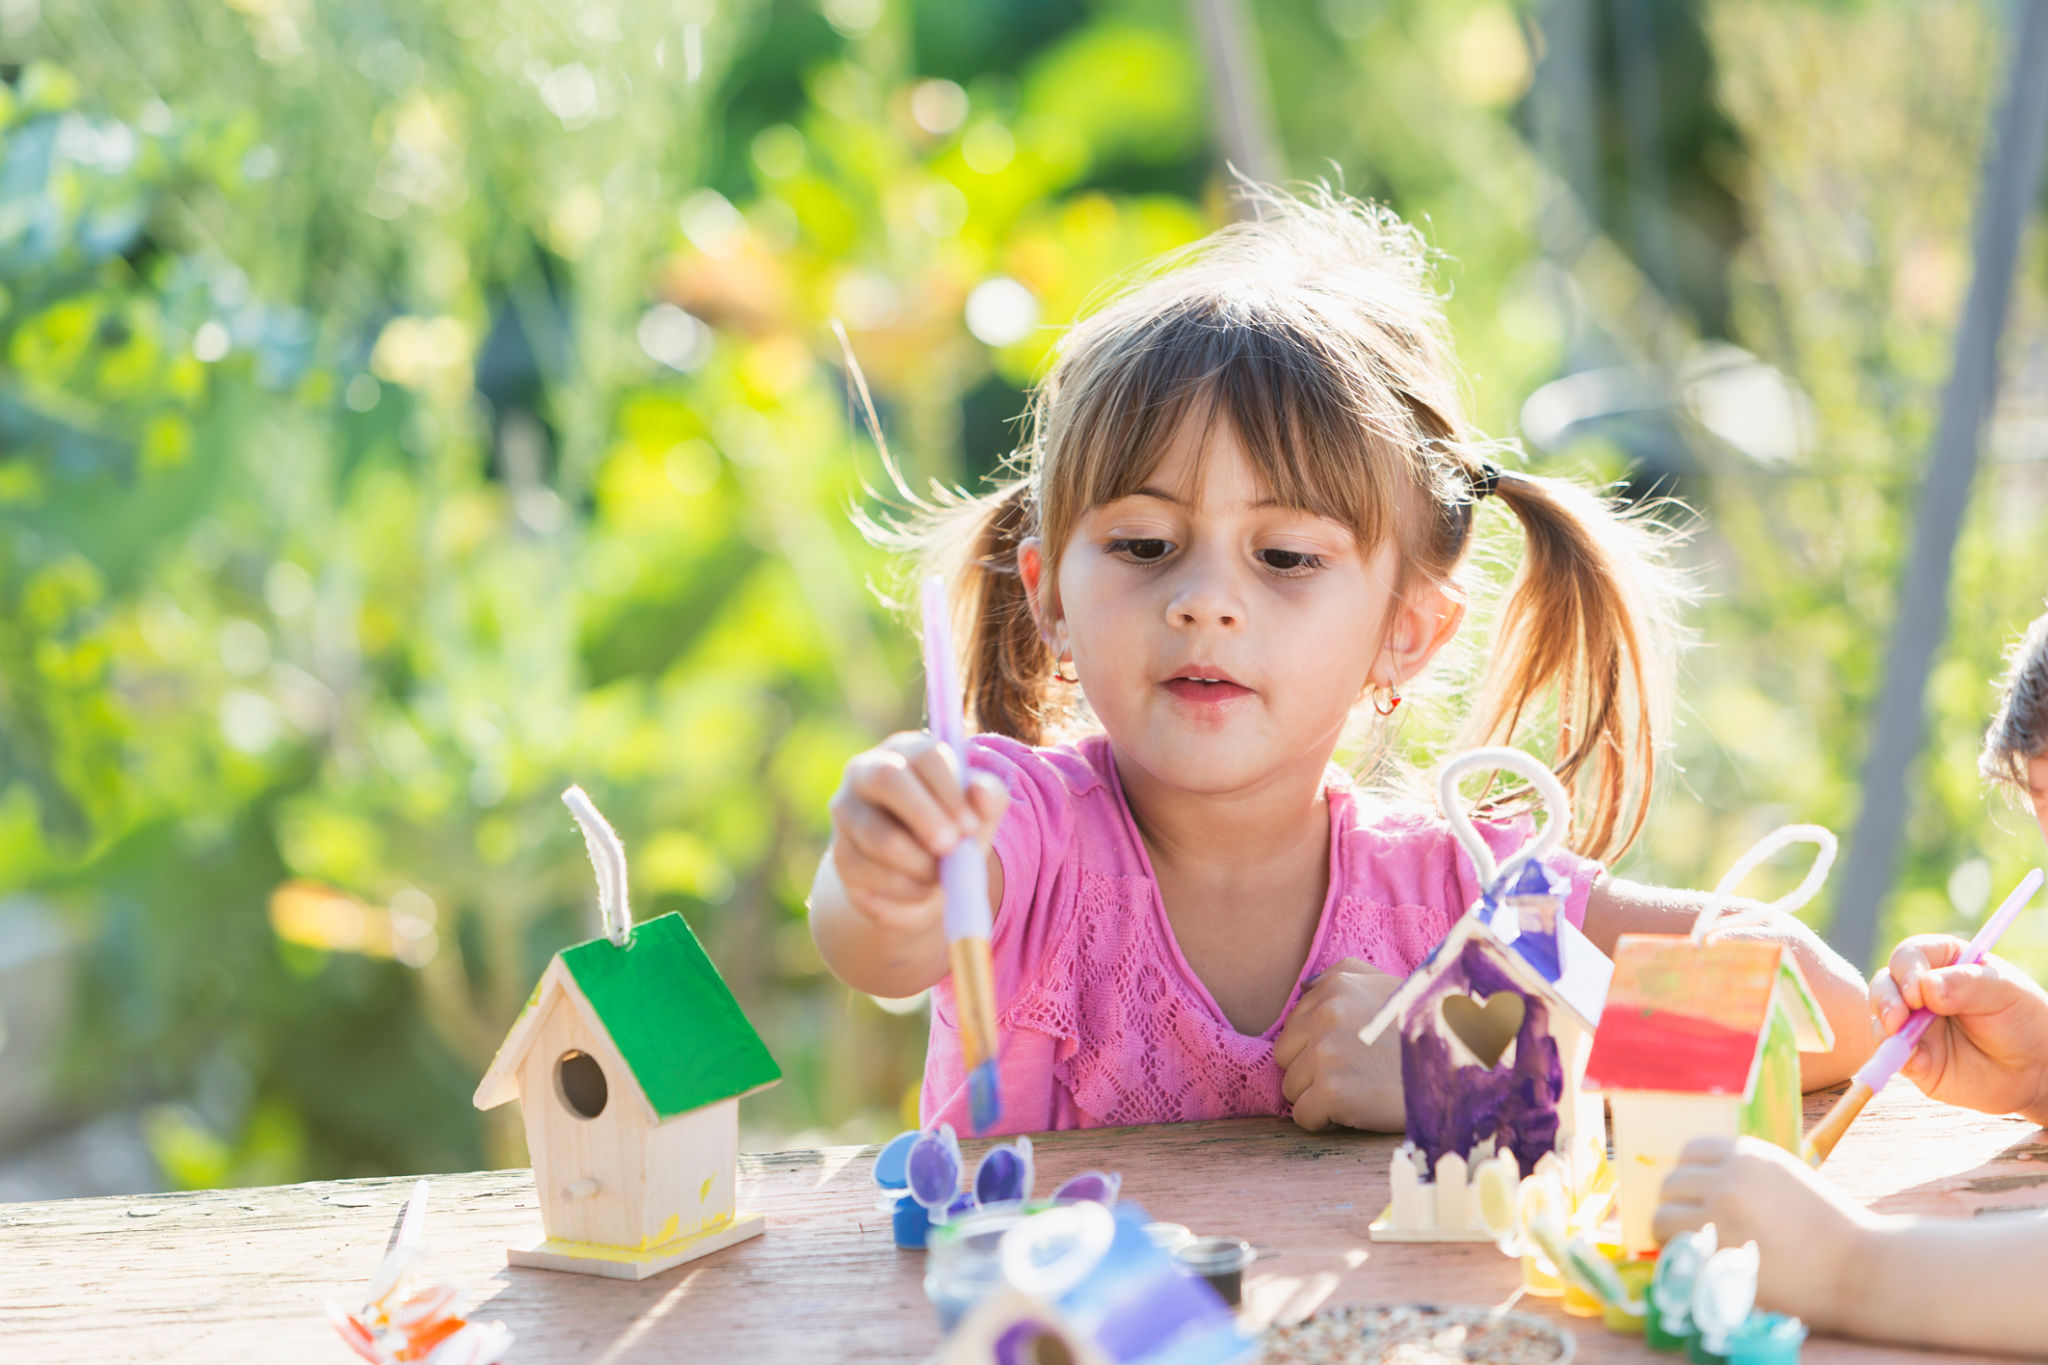 A cute little Hispanic, 3 year old girl sitting outdoors at a table painting a wooden bird feeder.  It is a bright, sunny day in a garden, plants out of focus in the background.  The child is wearing a pink shirt and her hair is tied up in pig tails.